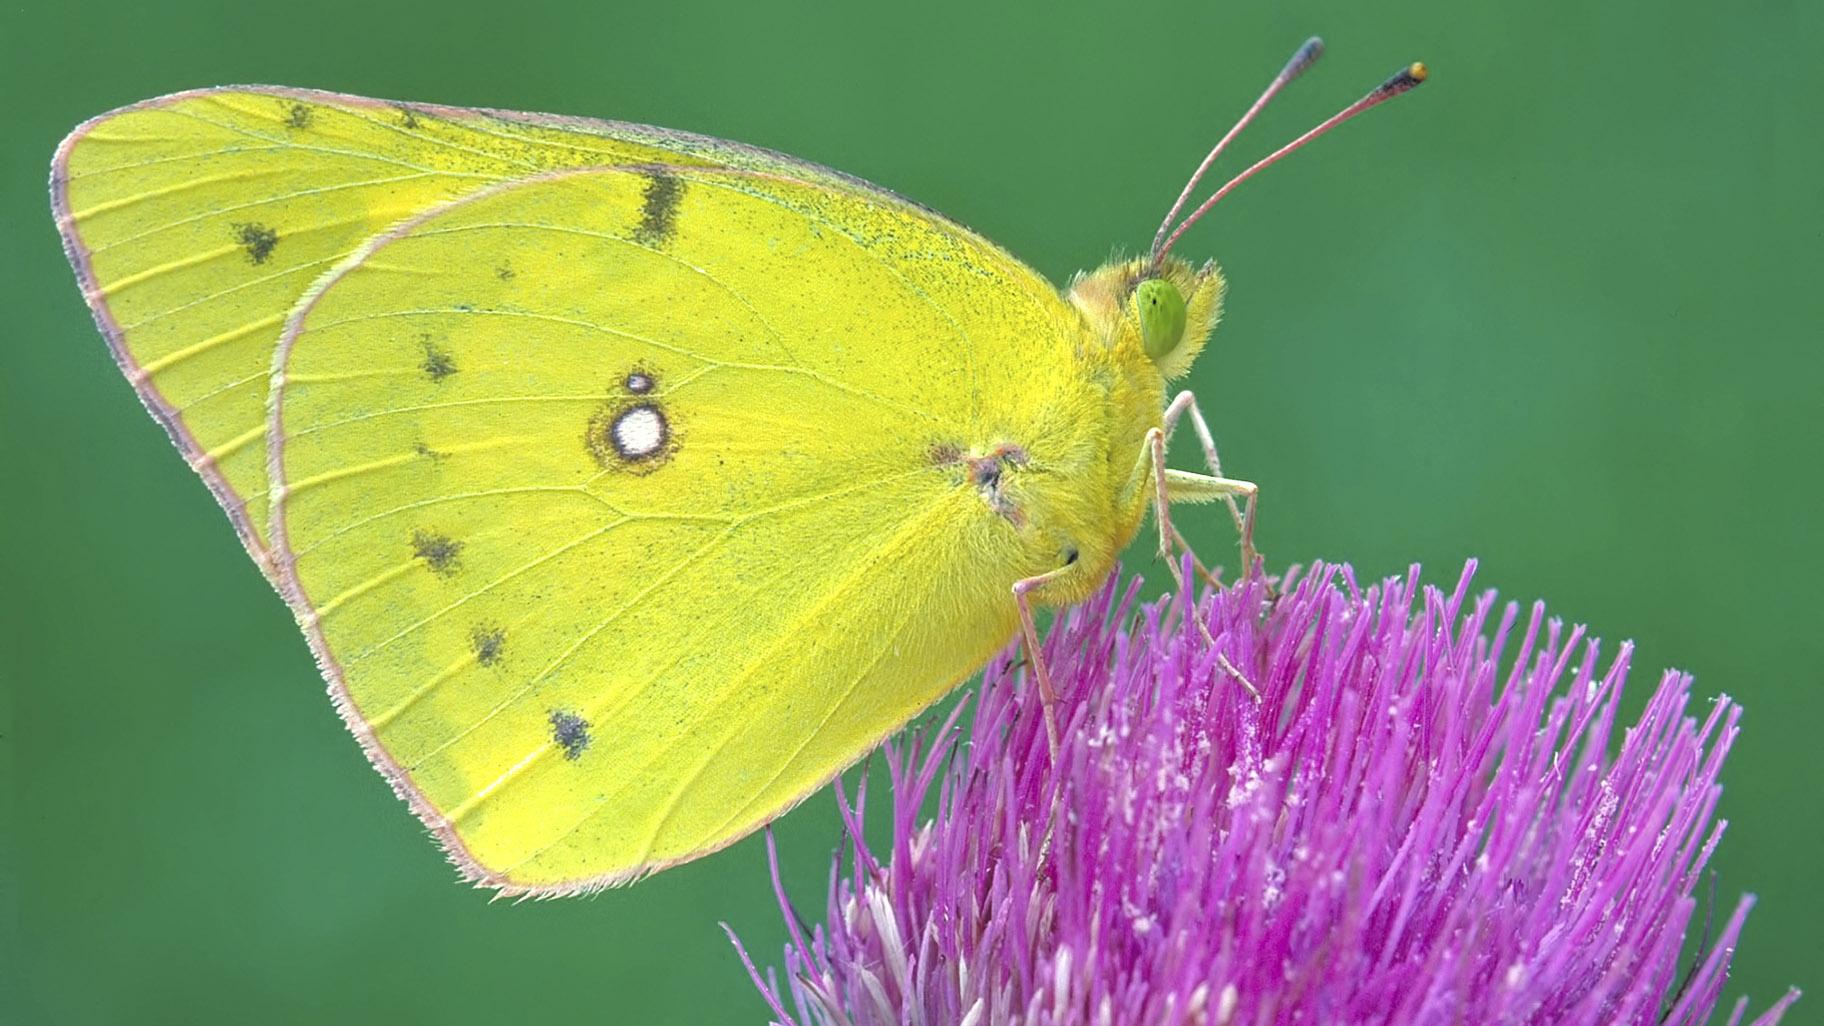 This undated photo provided by Michael Thomas in April 2020 shows a clouded sulphur butterfly in Cromwell, Conn. (Mike Thomas via AP)